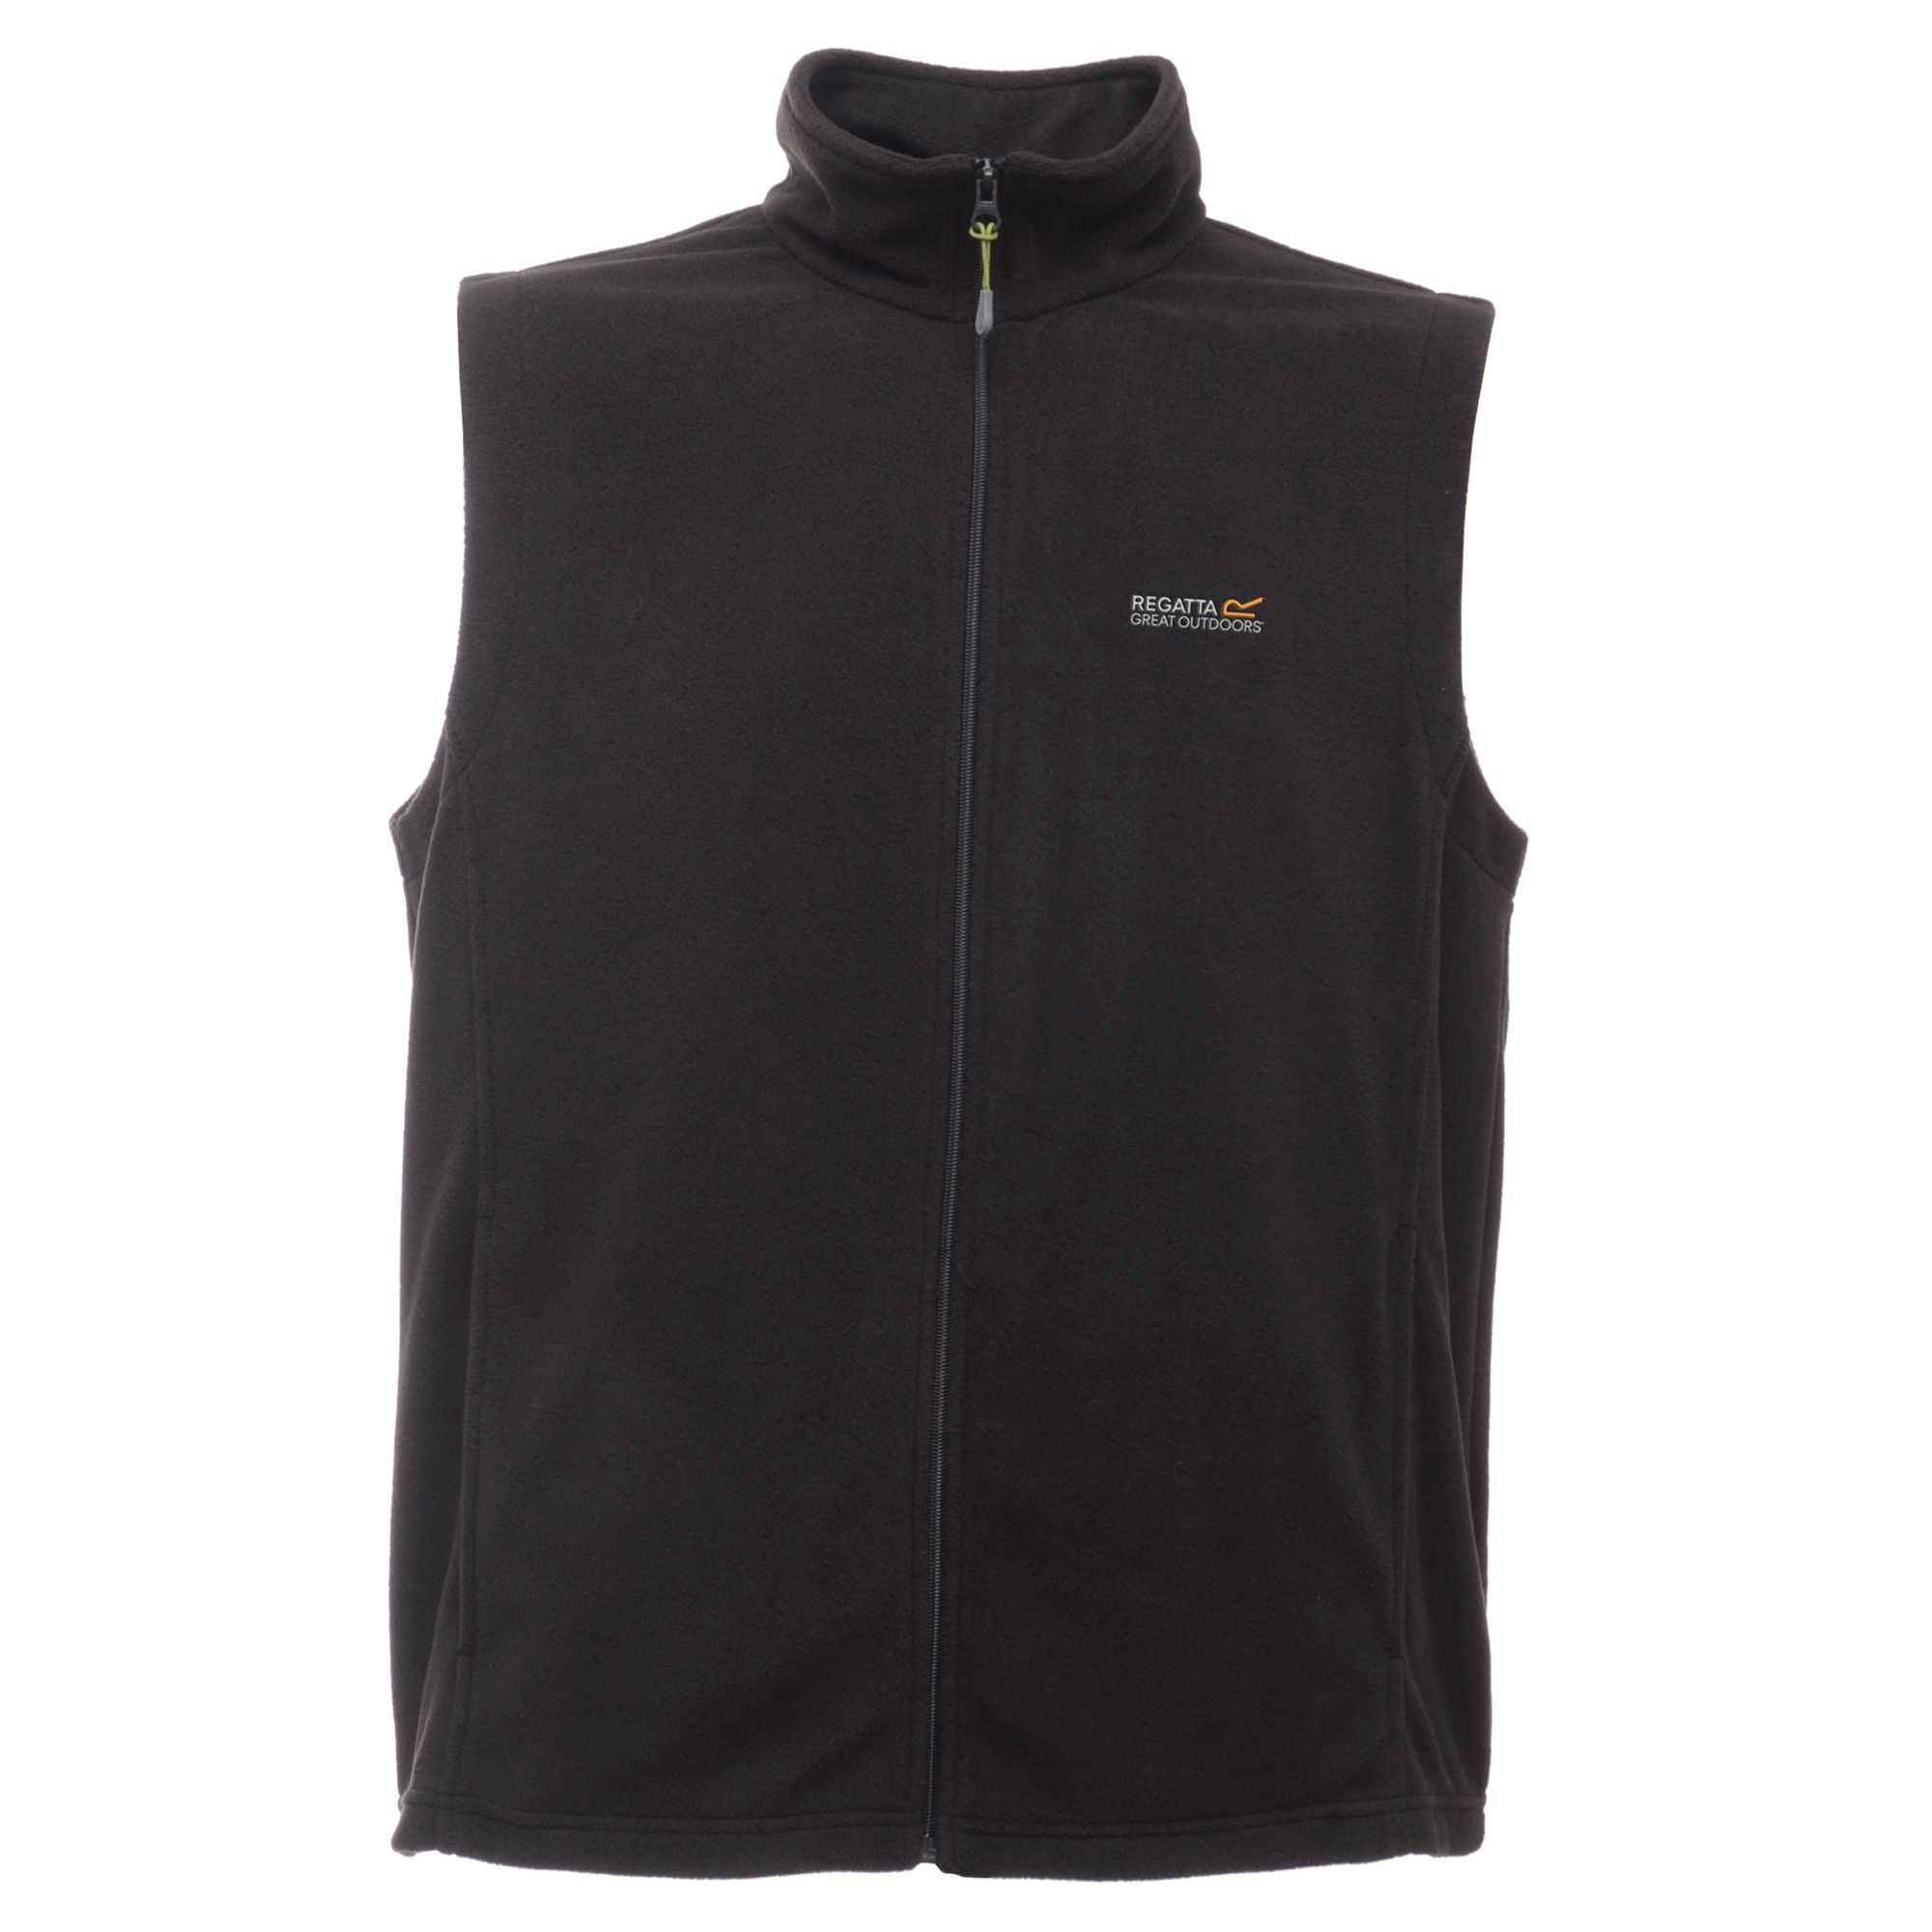 The mens Tobias II is a popular four-season fleece bodywarmer, loved for both its great value and quality. Its cut with a relaxed, everyday fit from lightweight Symmetry fleece with a full zip fastening. Pop it on over shirts when theres a nip in the air or layer it under jackets for extra warmth during winter months. 100% Polyester. Regatta Mens sizing (chest approx): XS (35-36in/89-91.5cm), S (37-38in/94-96.5cm), M (39-40in/99-101.5cm), L (41-42in/104-106.5cm), XL (43-44in/109-112cm), XXL (46-48in/117-122cm), XXXL (49-51in/124.5-129.5cm), XXXXL (52-54in/132-137cm), XXXXXL (55-57in/140-145cm).